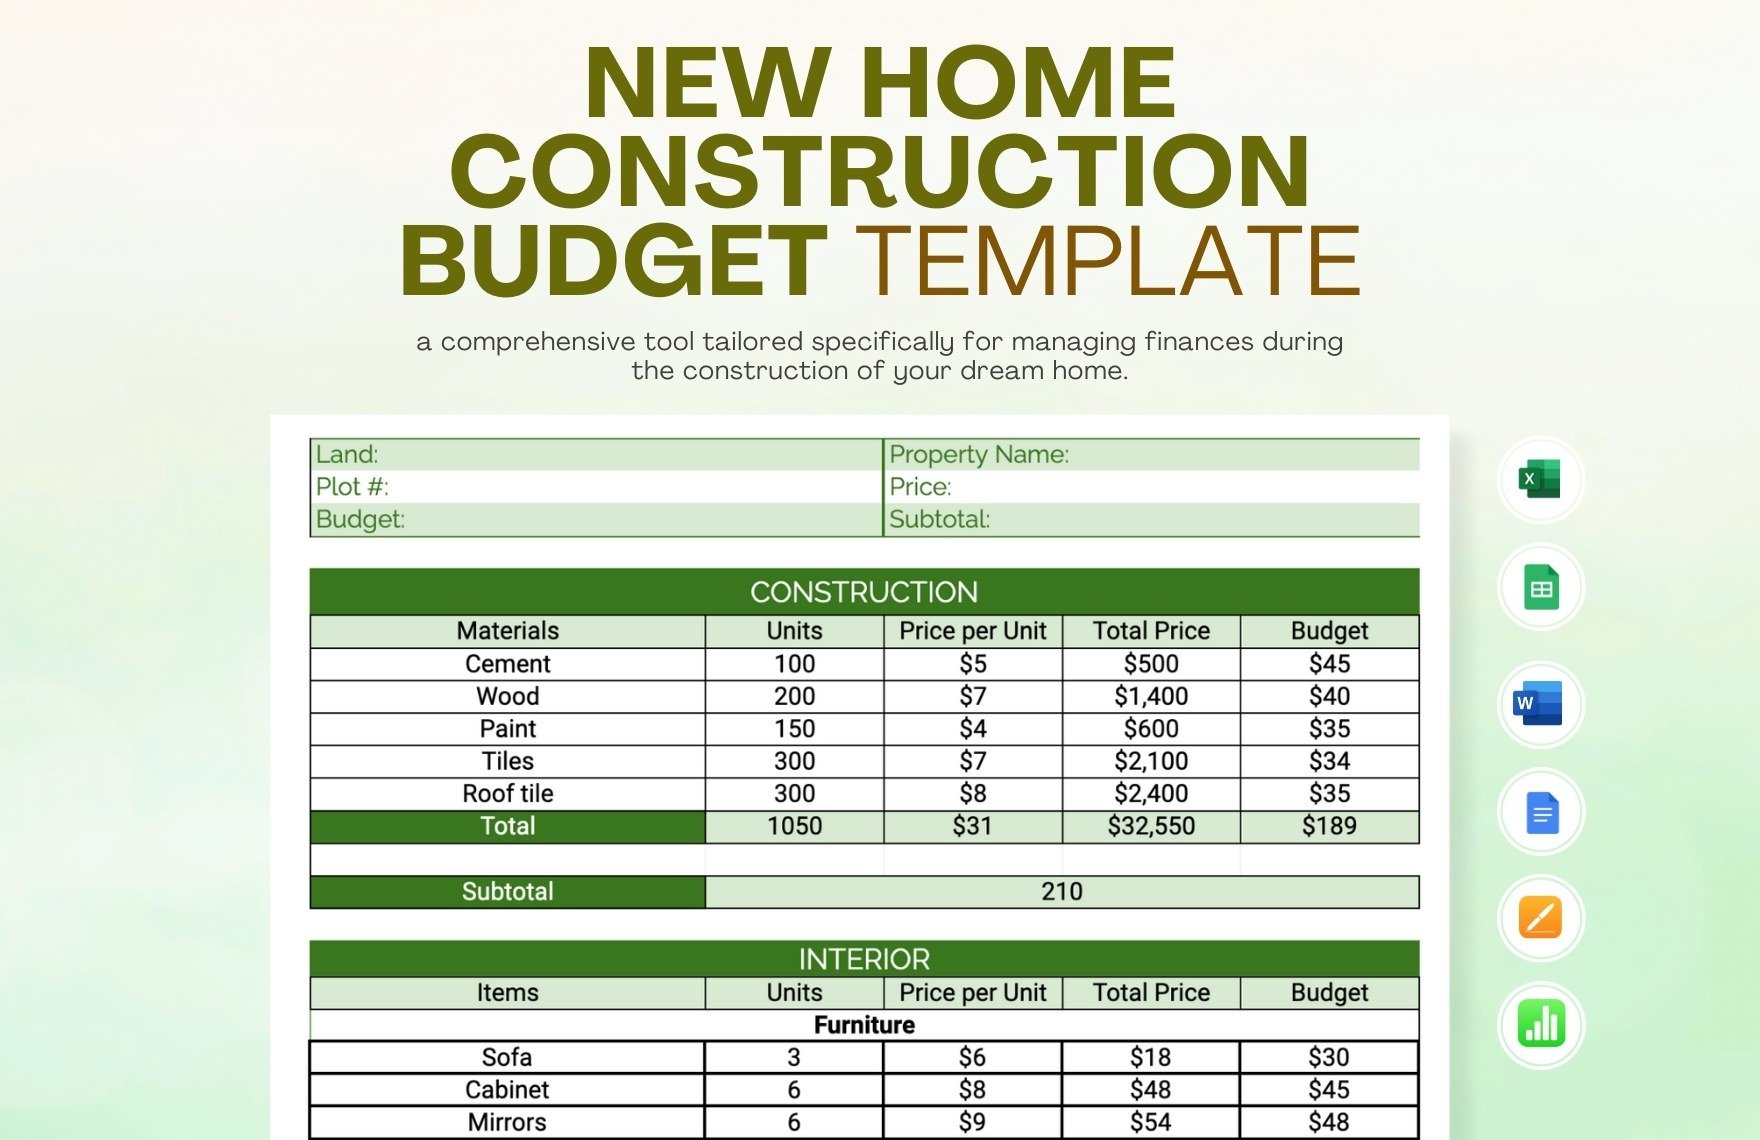 New Home Construction Budget Template in Word, Google Docs, Excel, Google Sheets, Apple Pages, Apple Numbers